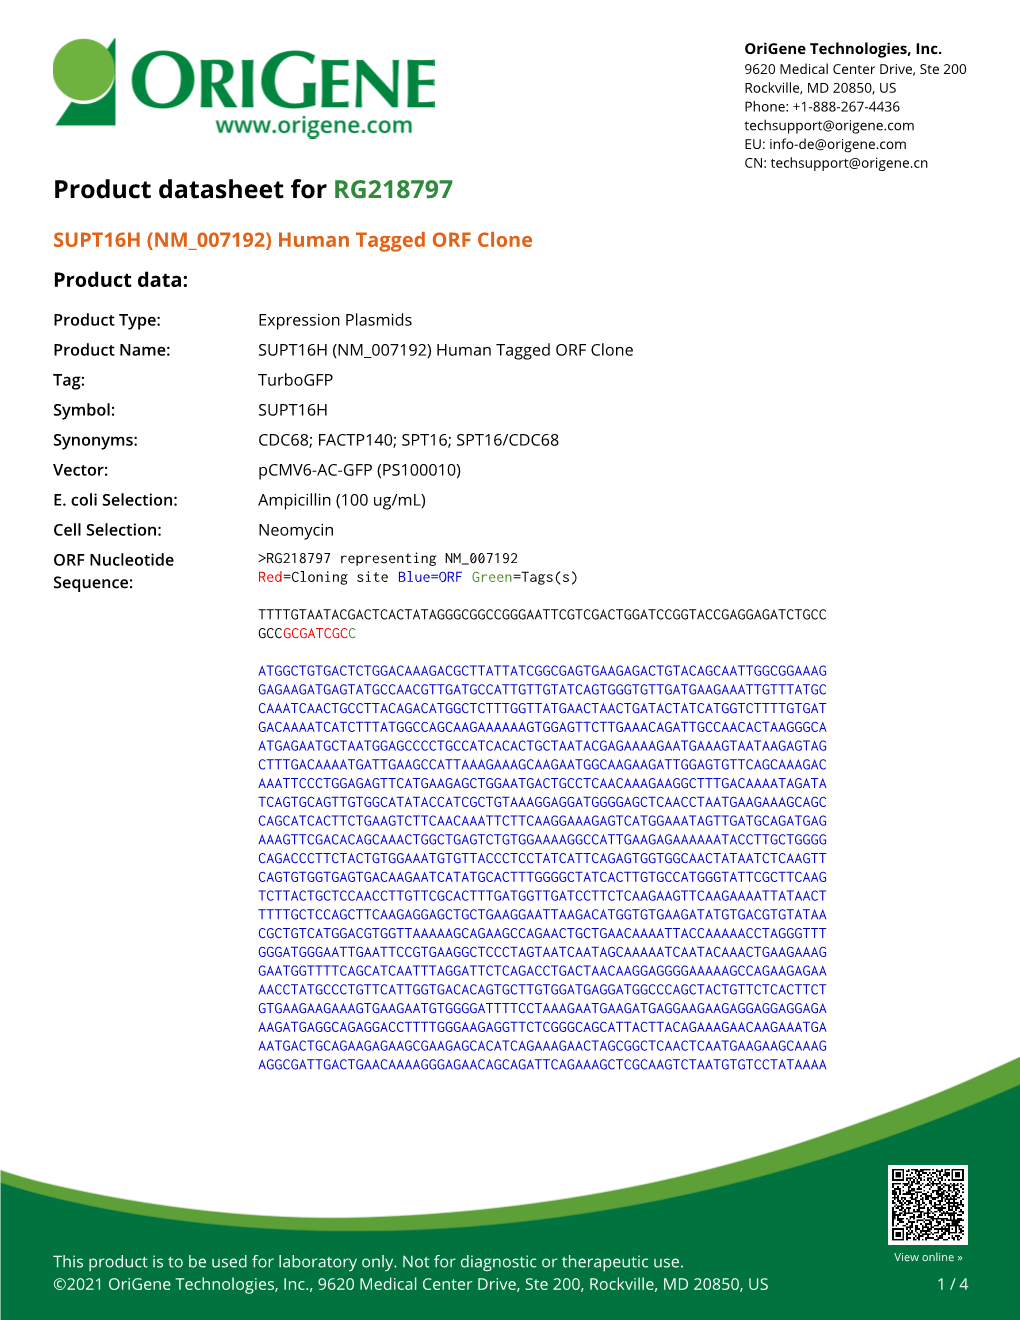 SUPT16H (NM 007192) Human Tagged ORF Clone Product Data